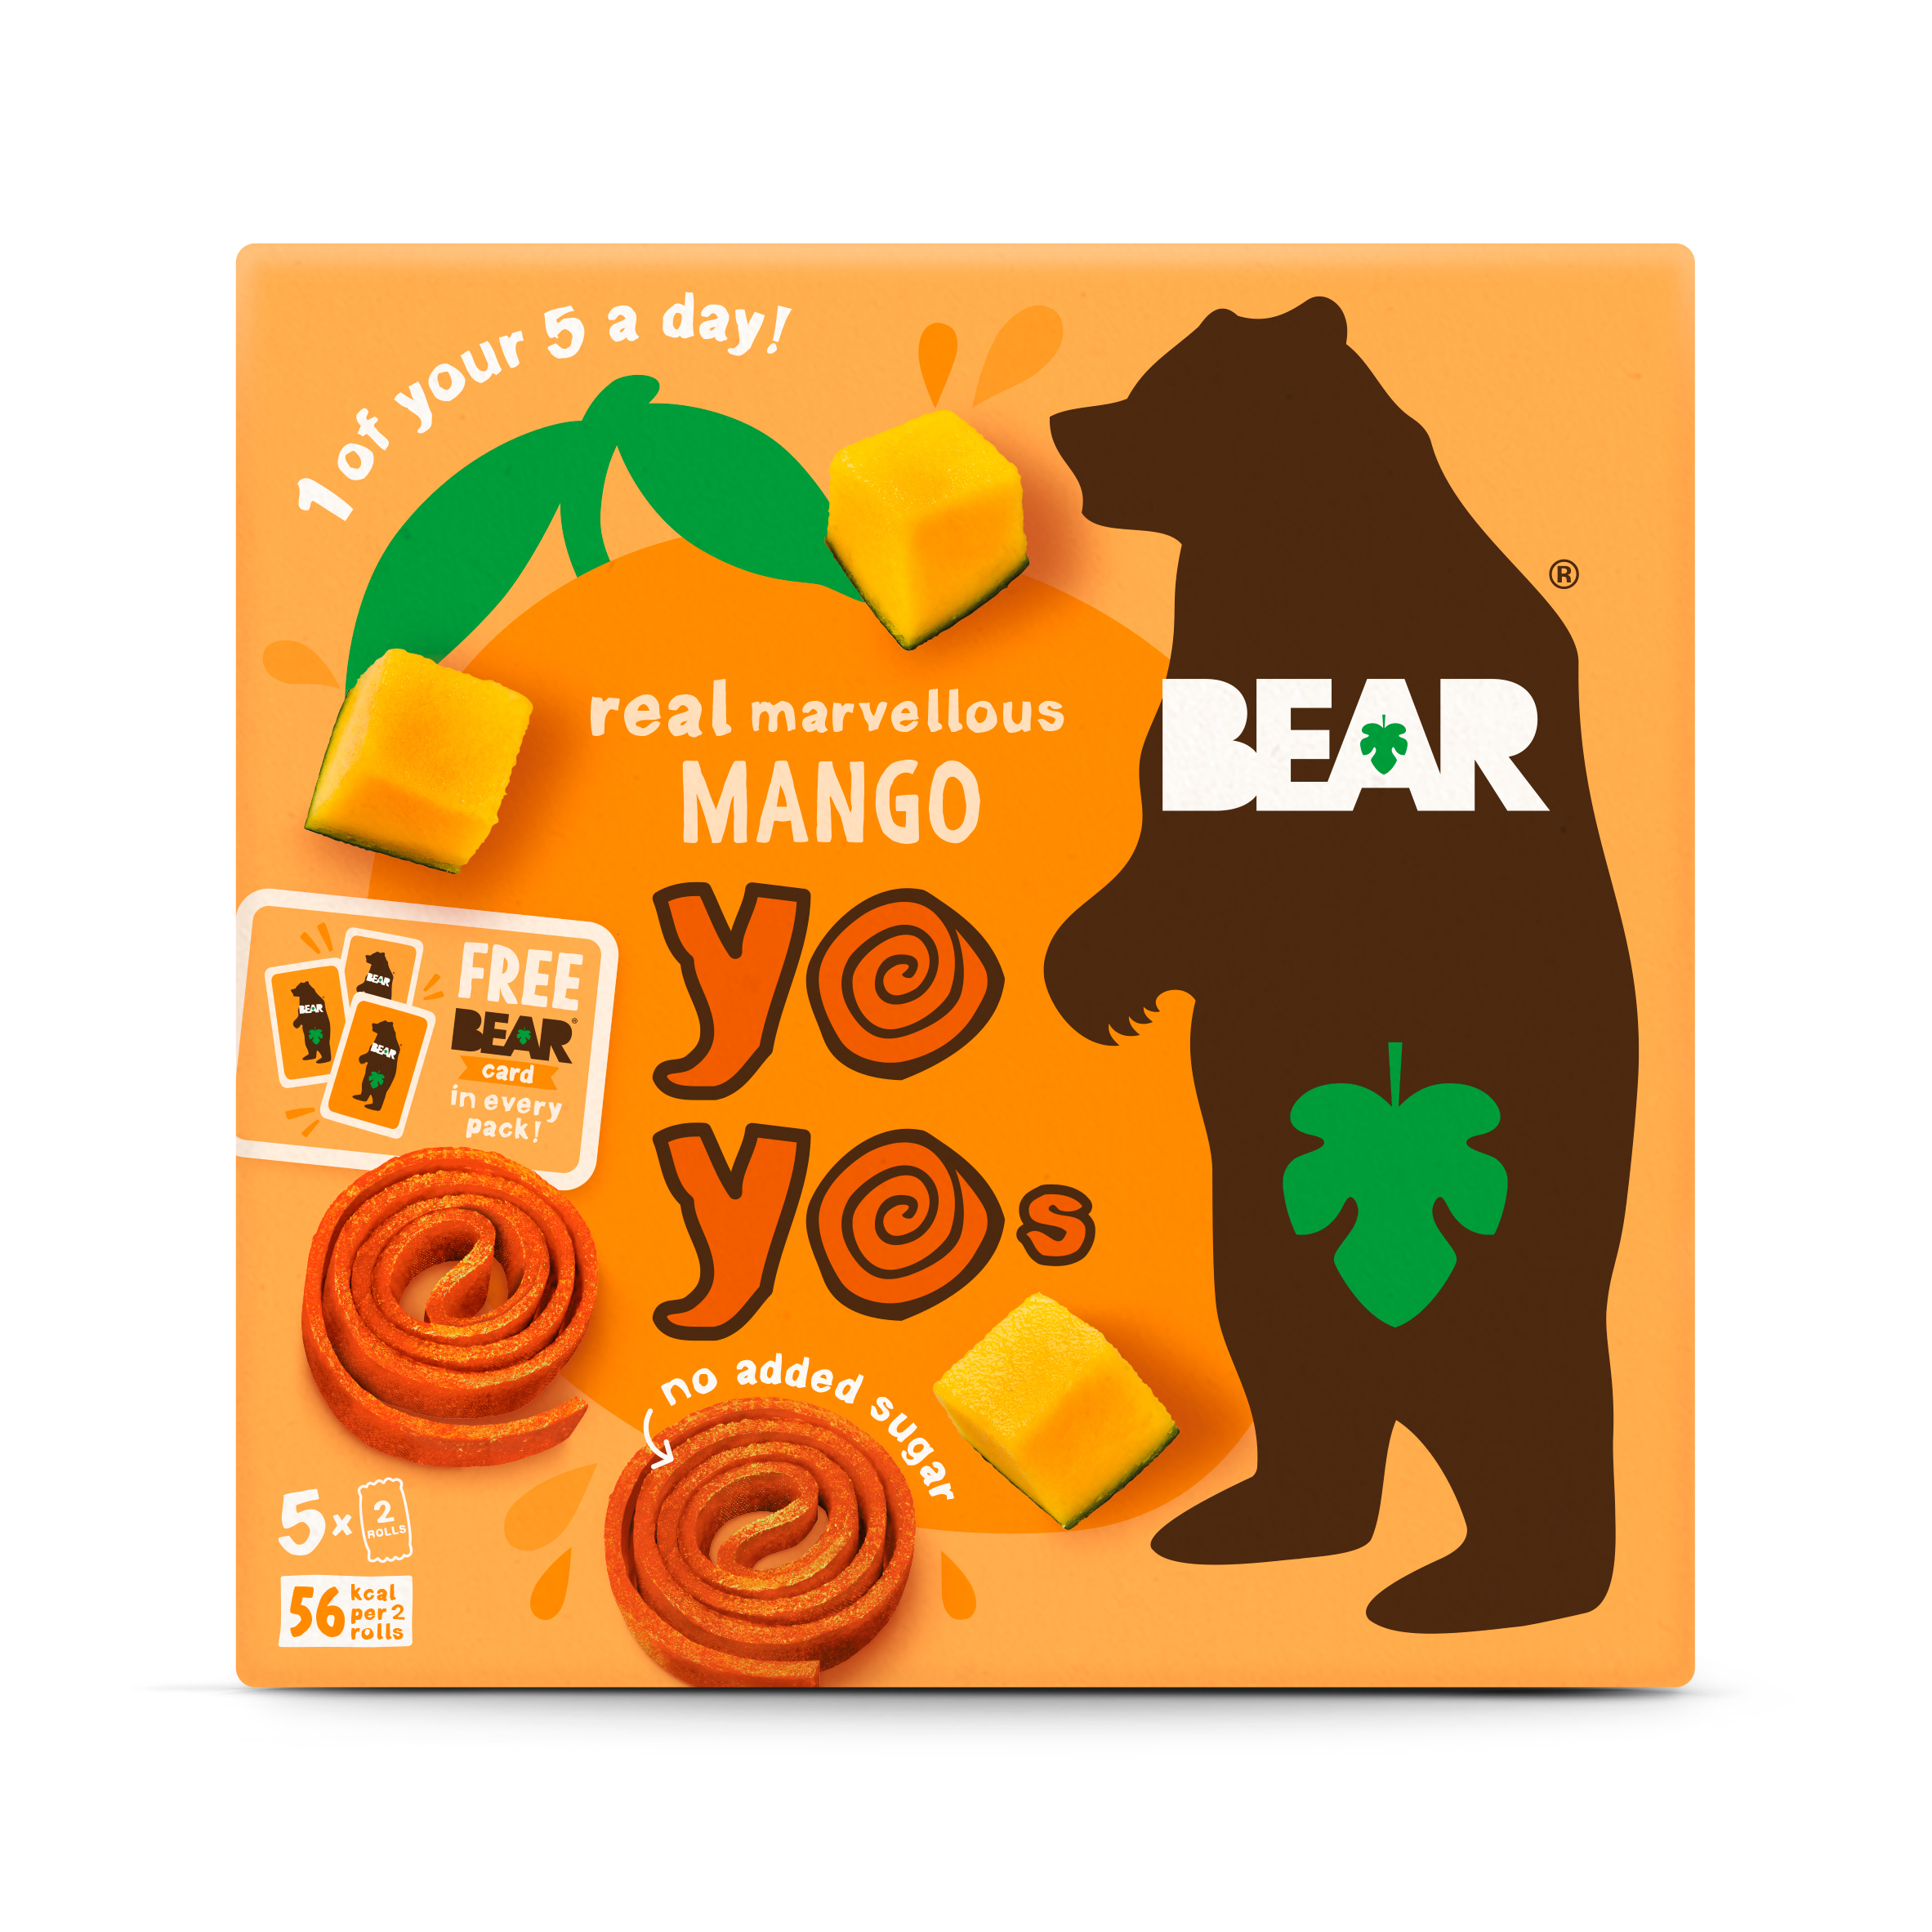 New year, new look for Bear kids fruit snacking brand